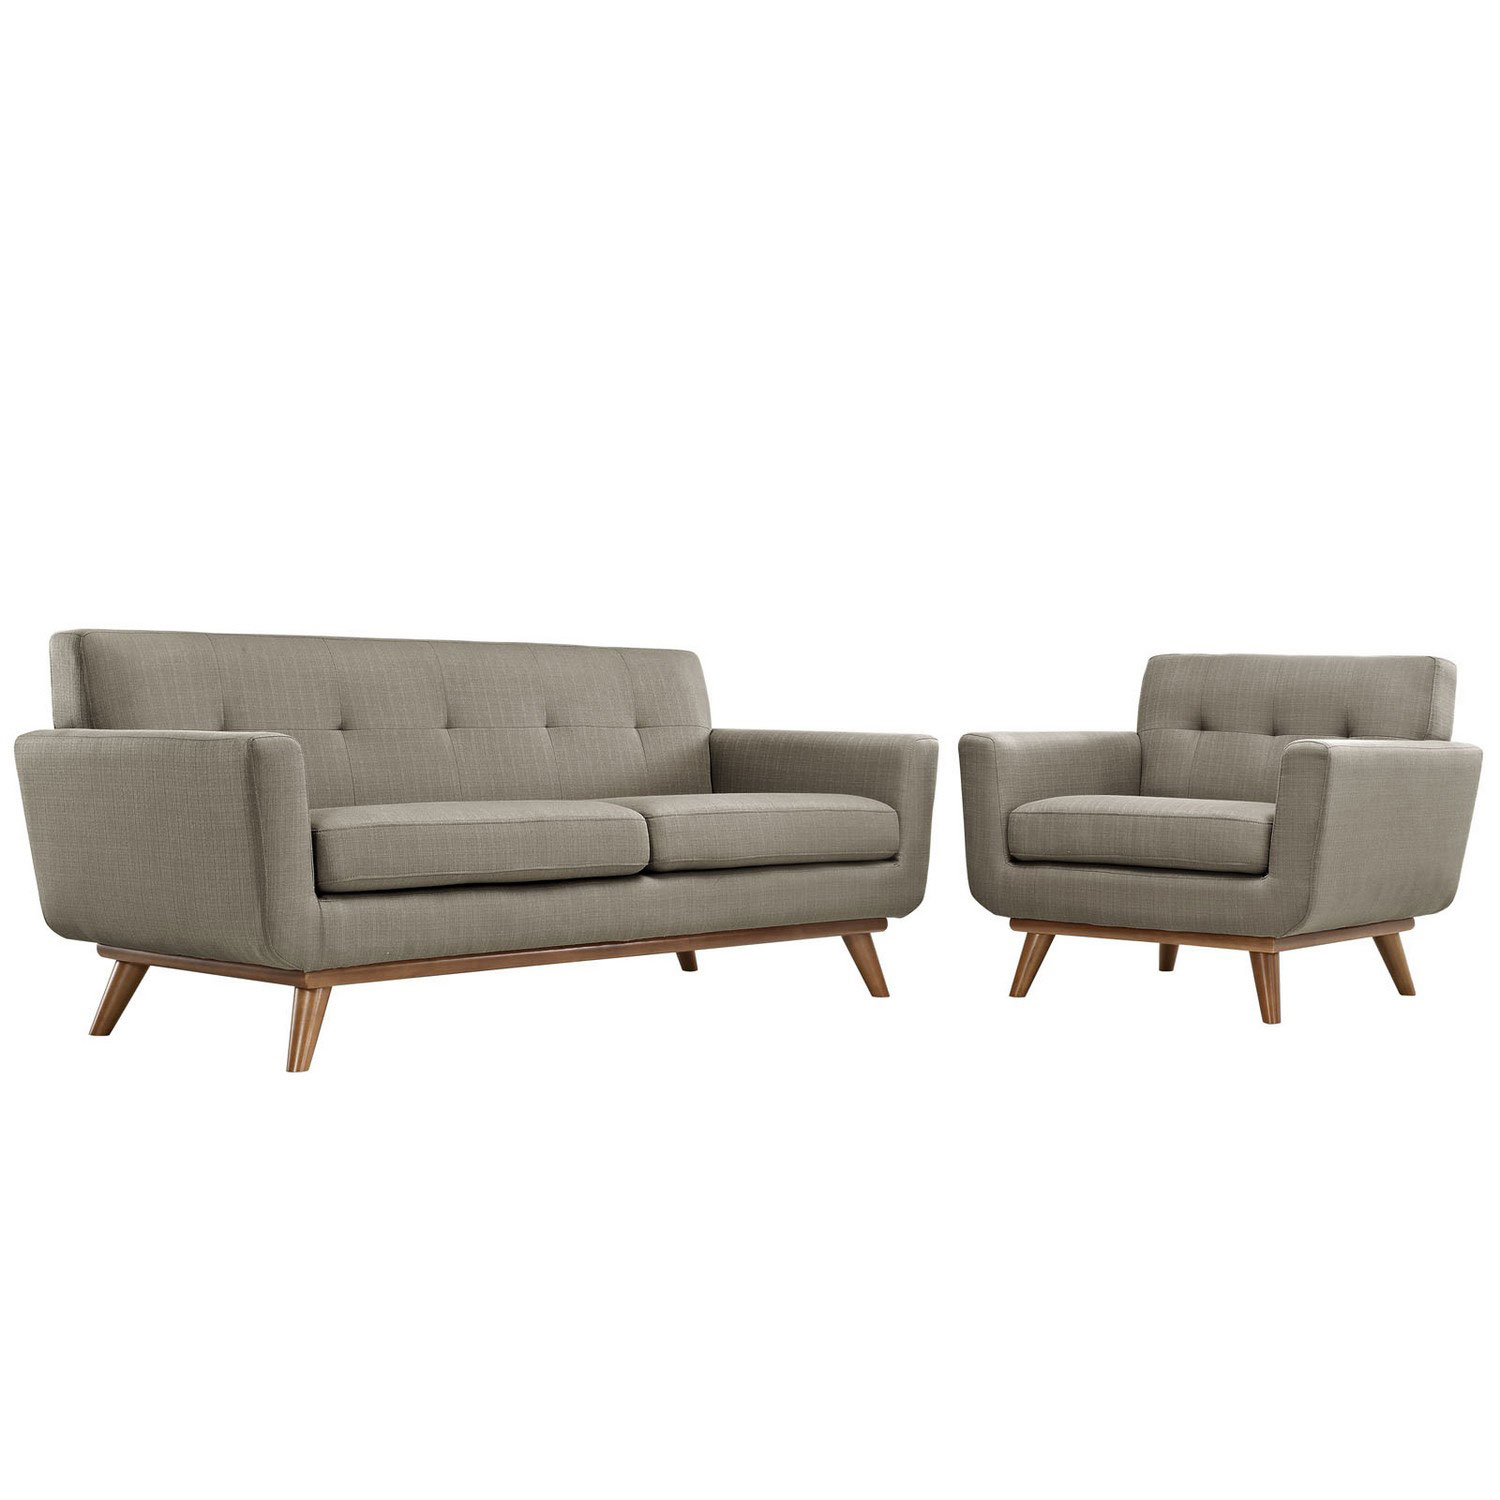 Modway Engage Armchair and Loveseat Set of 2 - Granite